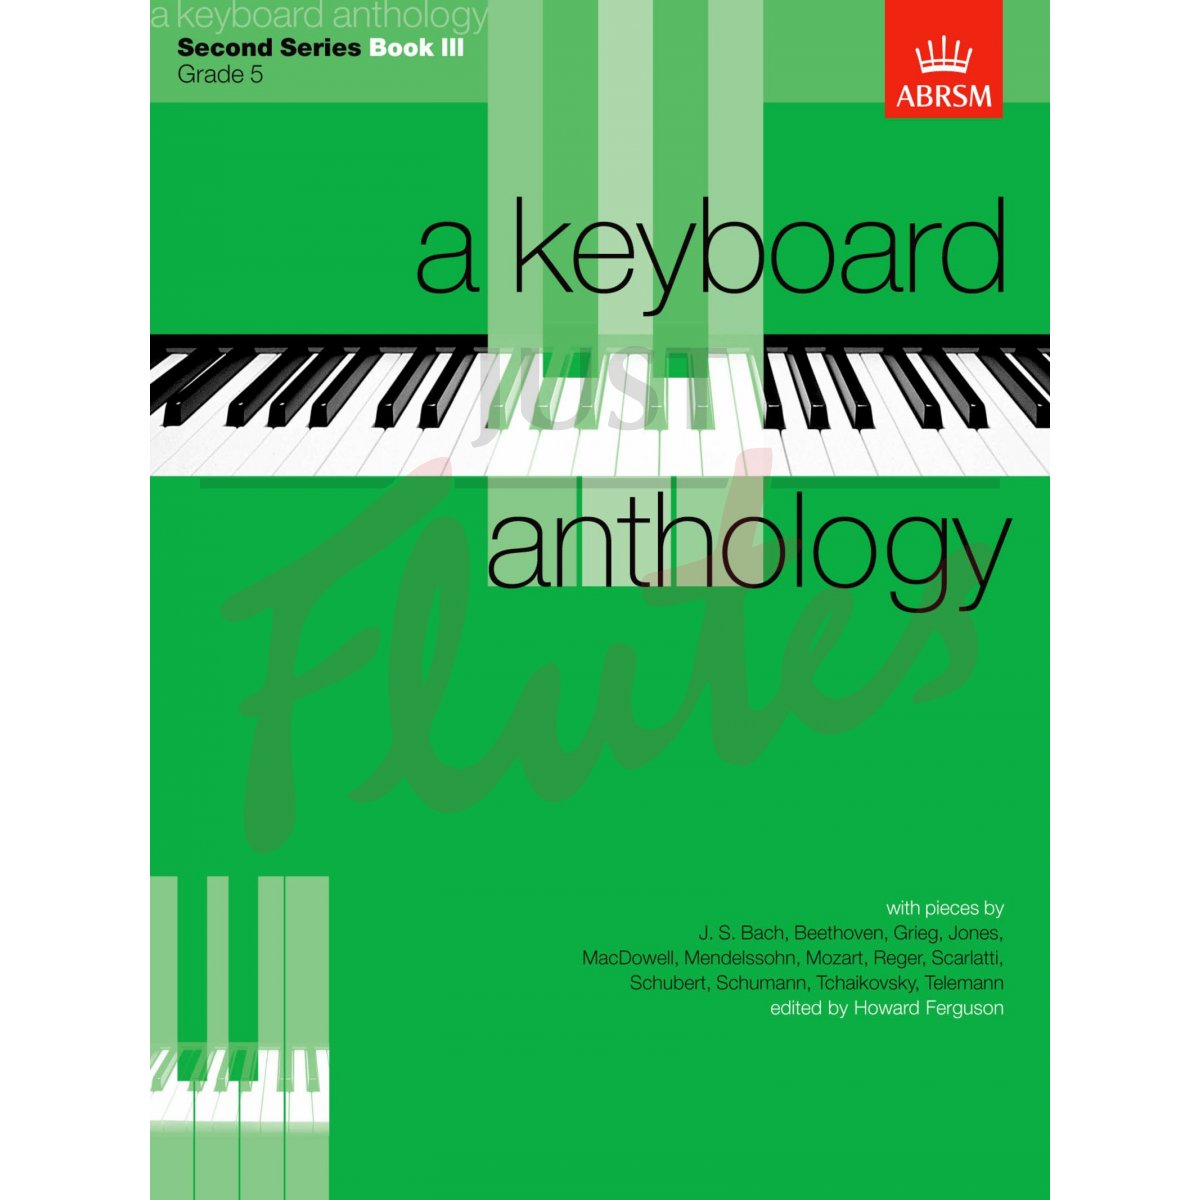 A Keyboard Anthology: Second Series Book 3